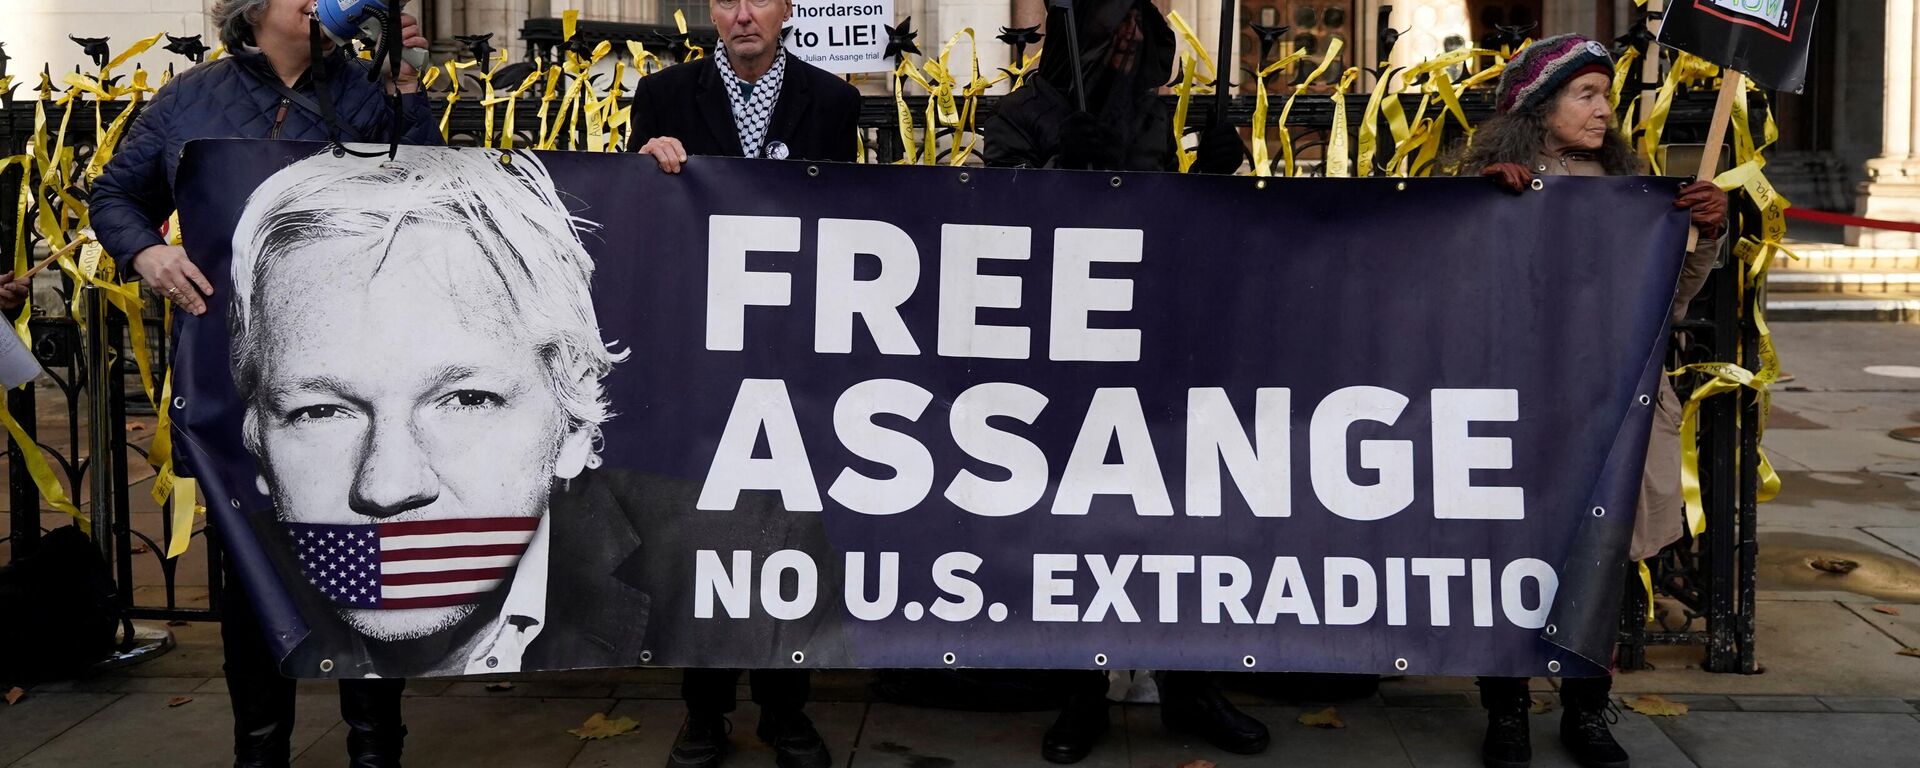 Supporters of WikiLeaks founder Julian Assange, hold placards outside the Royal Courts of Justice in London on December 10, 2021. - Sputnik International, 1920, 13.01.2022